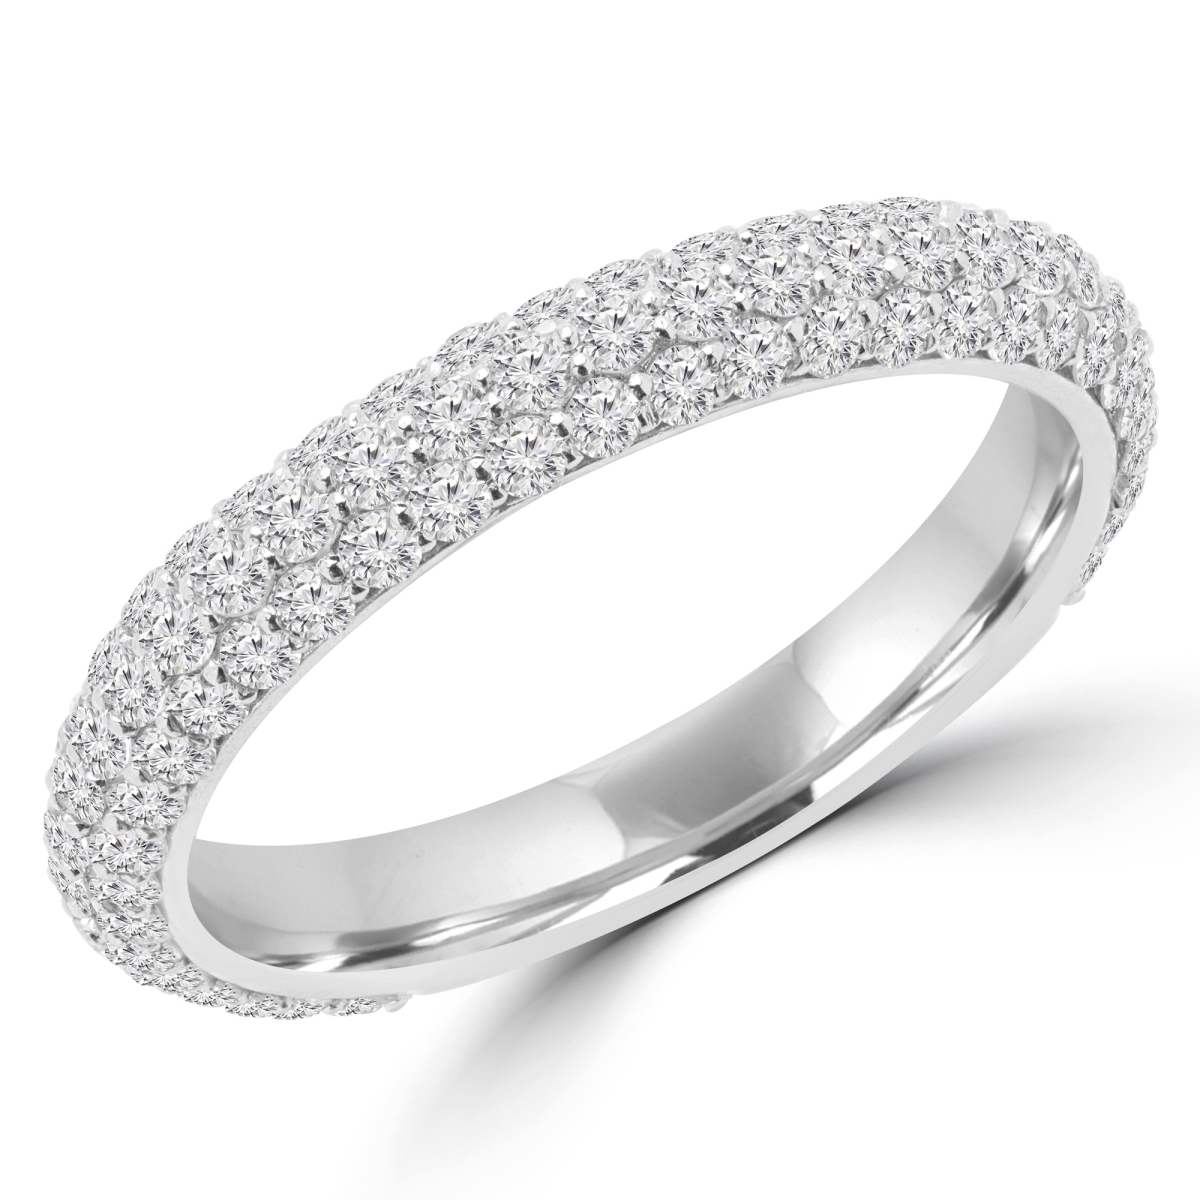 Picture of Majesty Diamonds MD170166-8.25 1.1 CTW Round Diamond Semi-Eternity Wedding Band Ring in 14K White Gold - 8.25